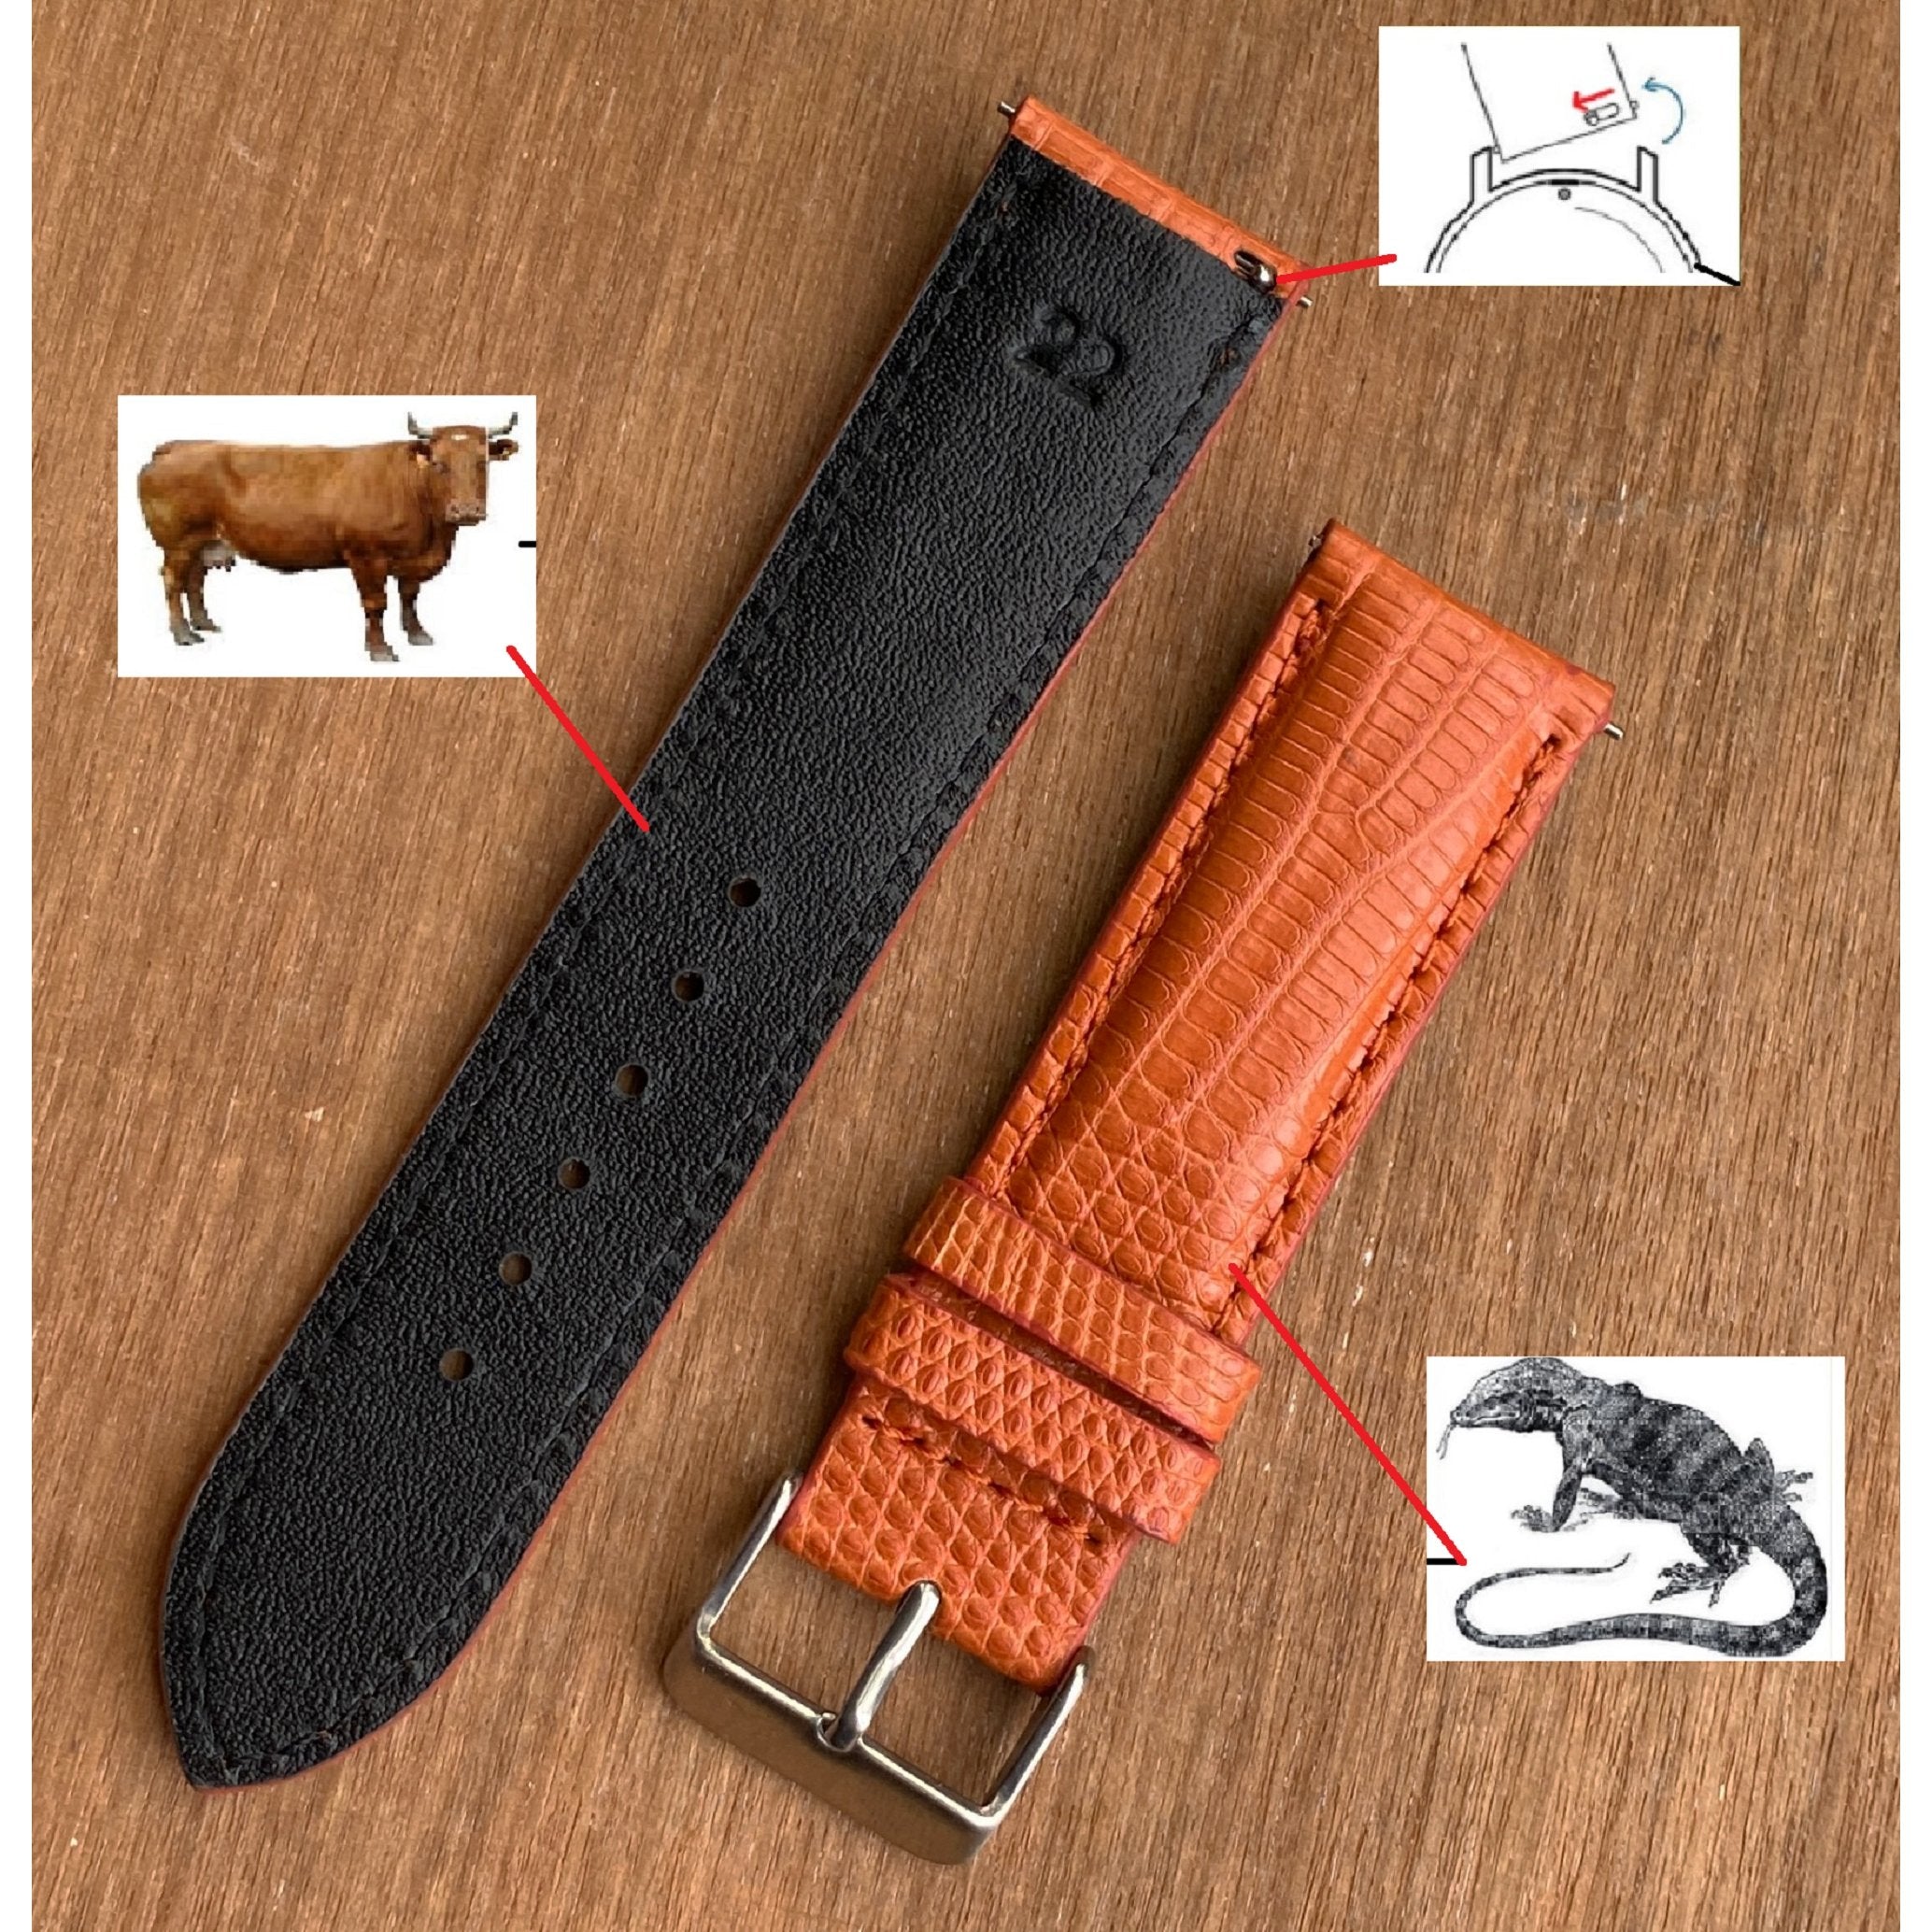 Handmade Orange Lizard Leather Watch Band For Men Quick Release Replacement Wristwatch Strap | DH-160 - Vinacreations